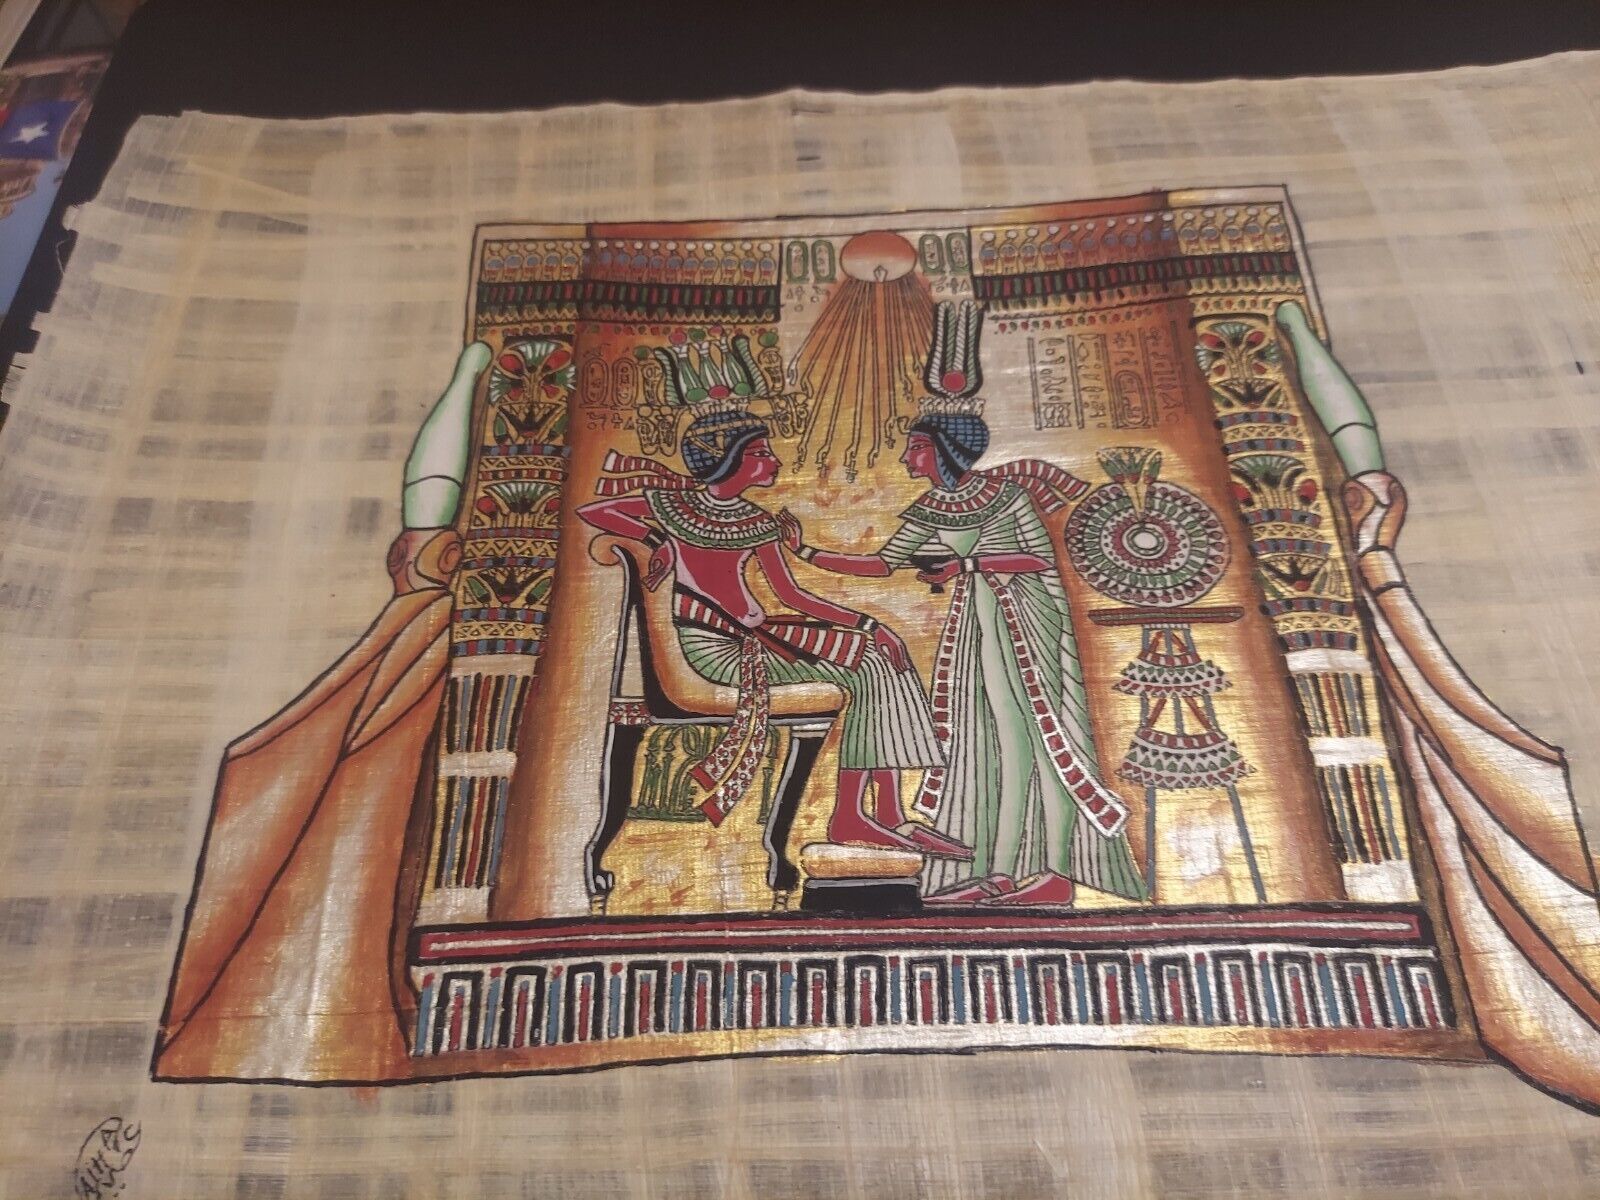 High Quality, Handmade Egyptian Papyrus with vivid color designs.